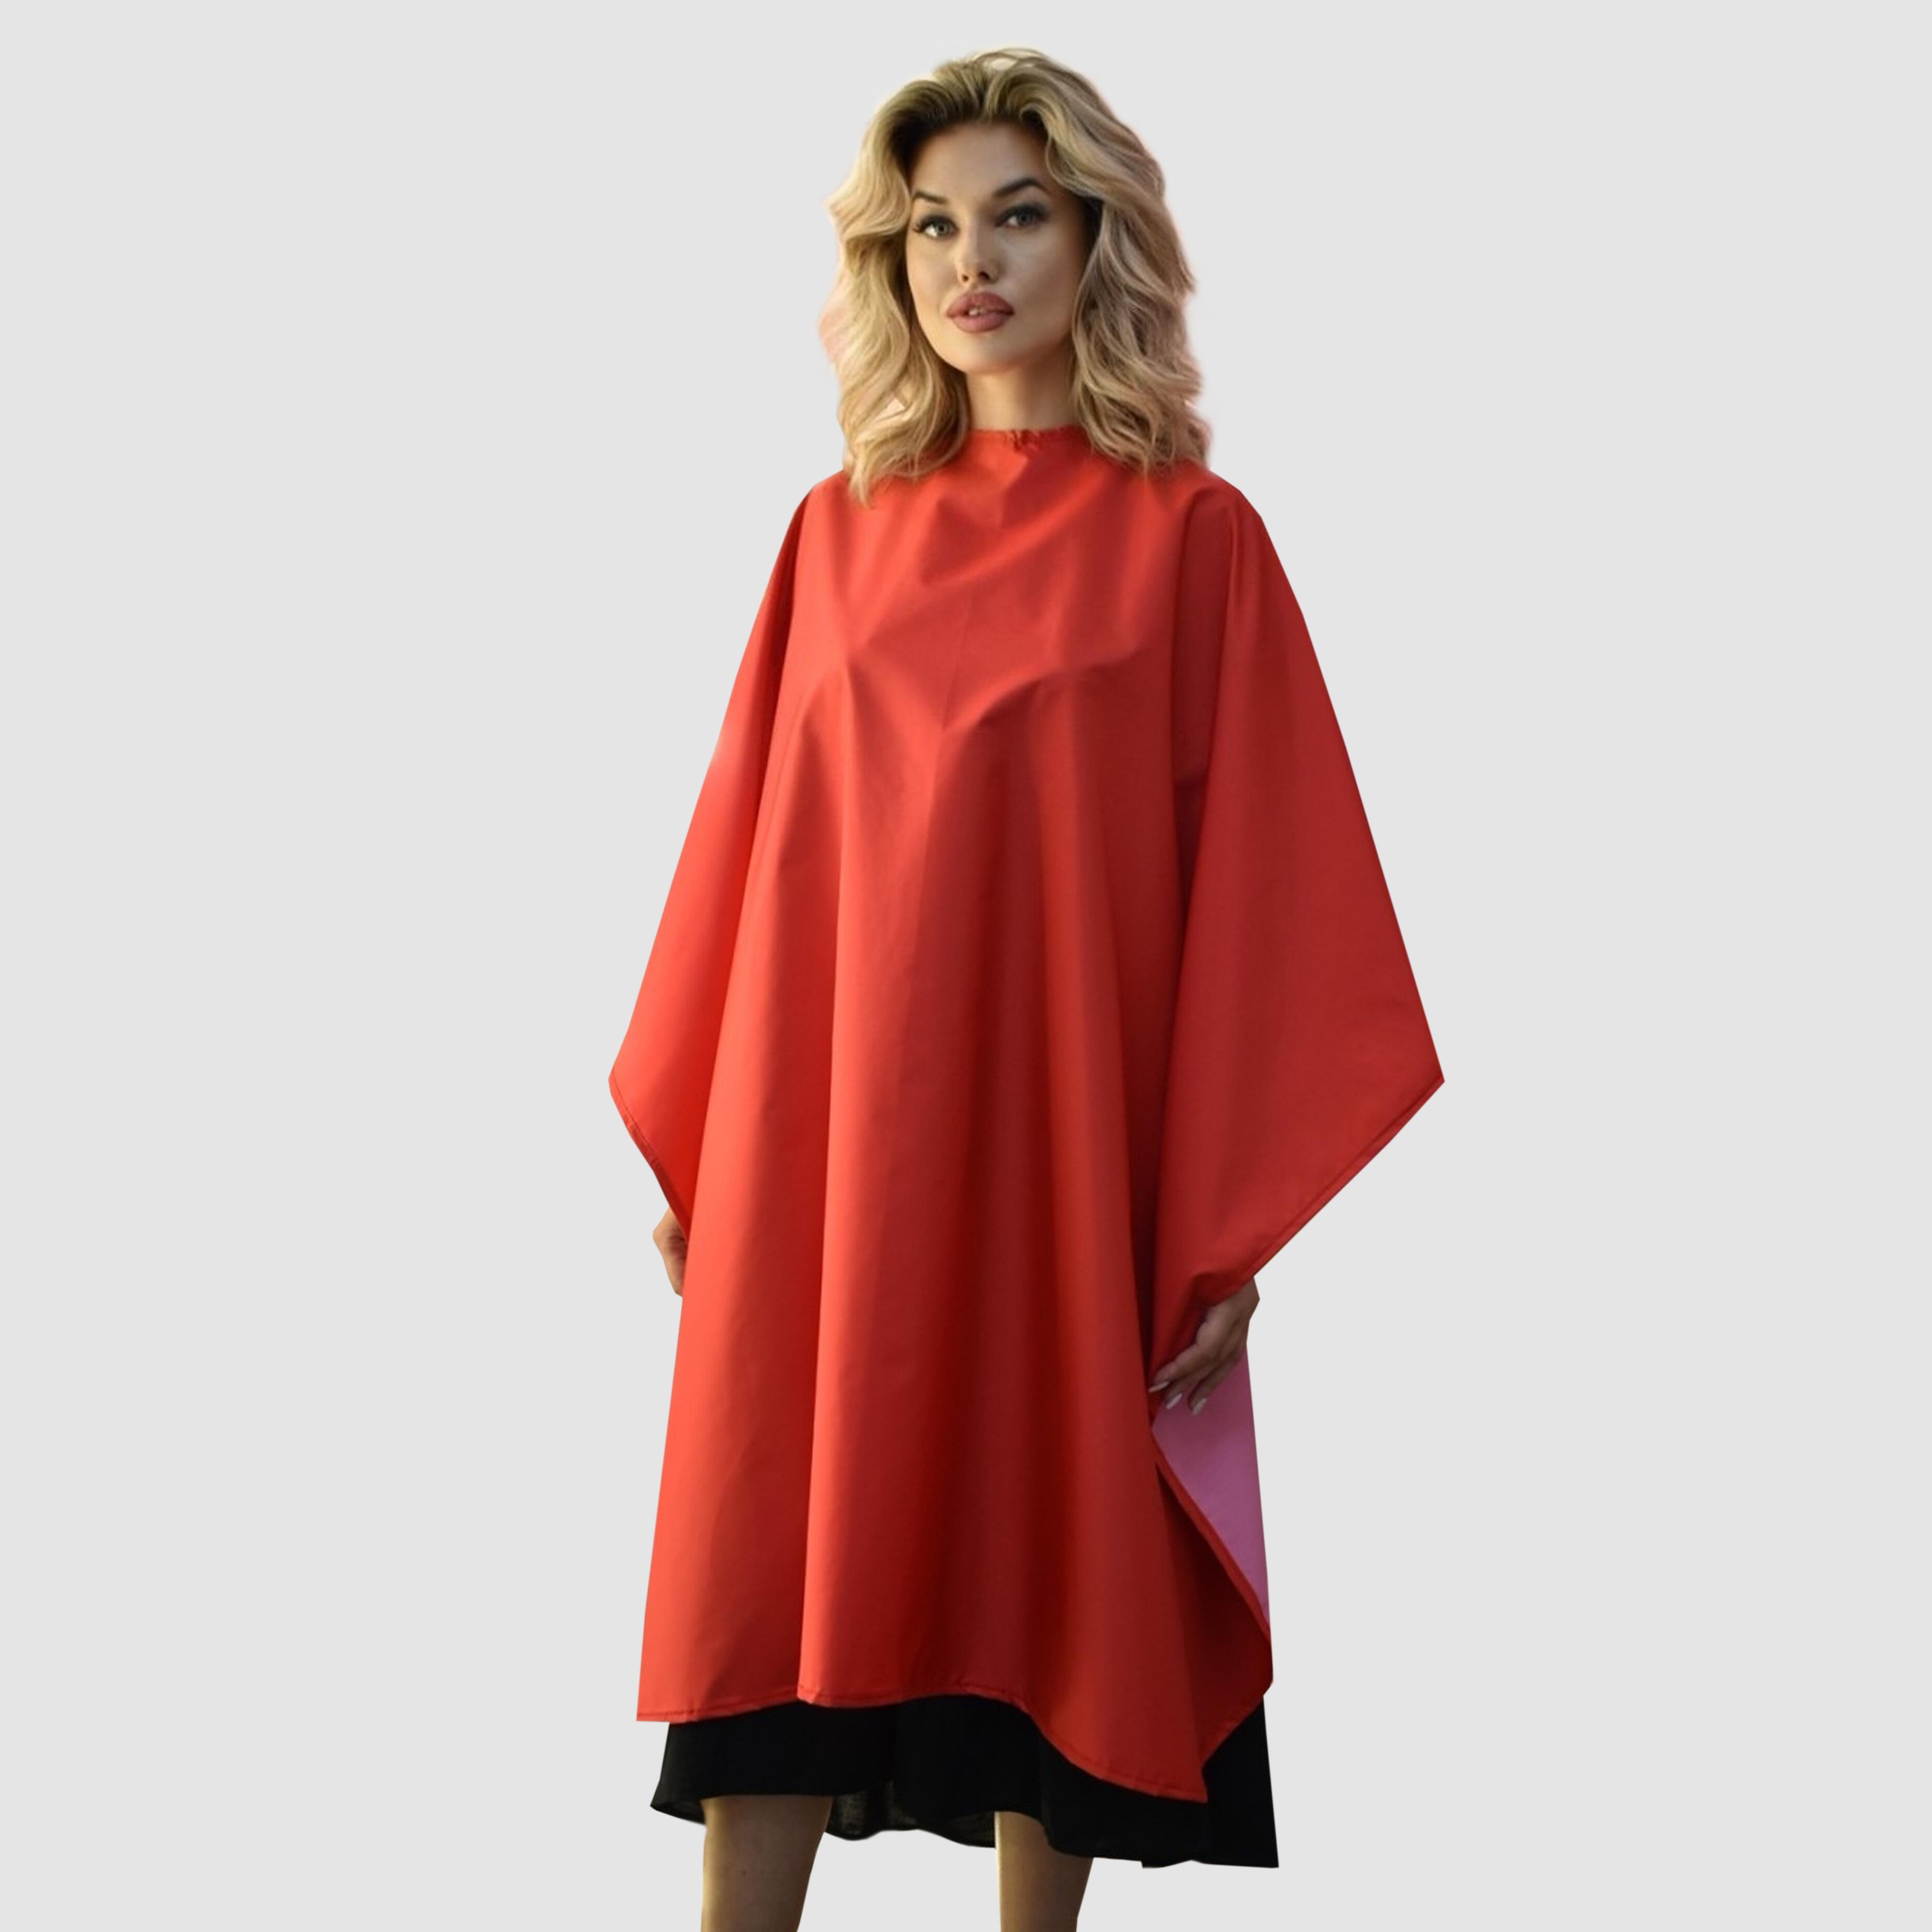 Nibano Salon Gown Red